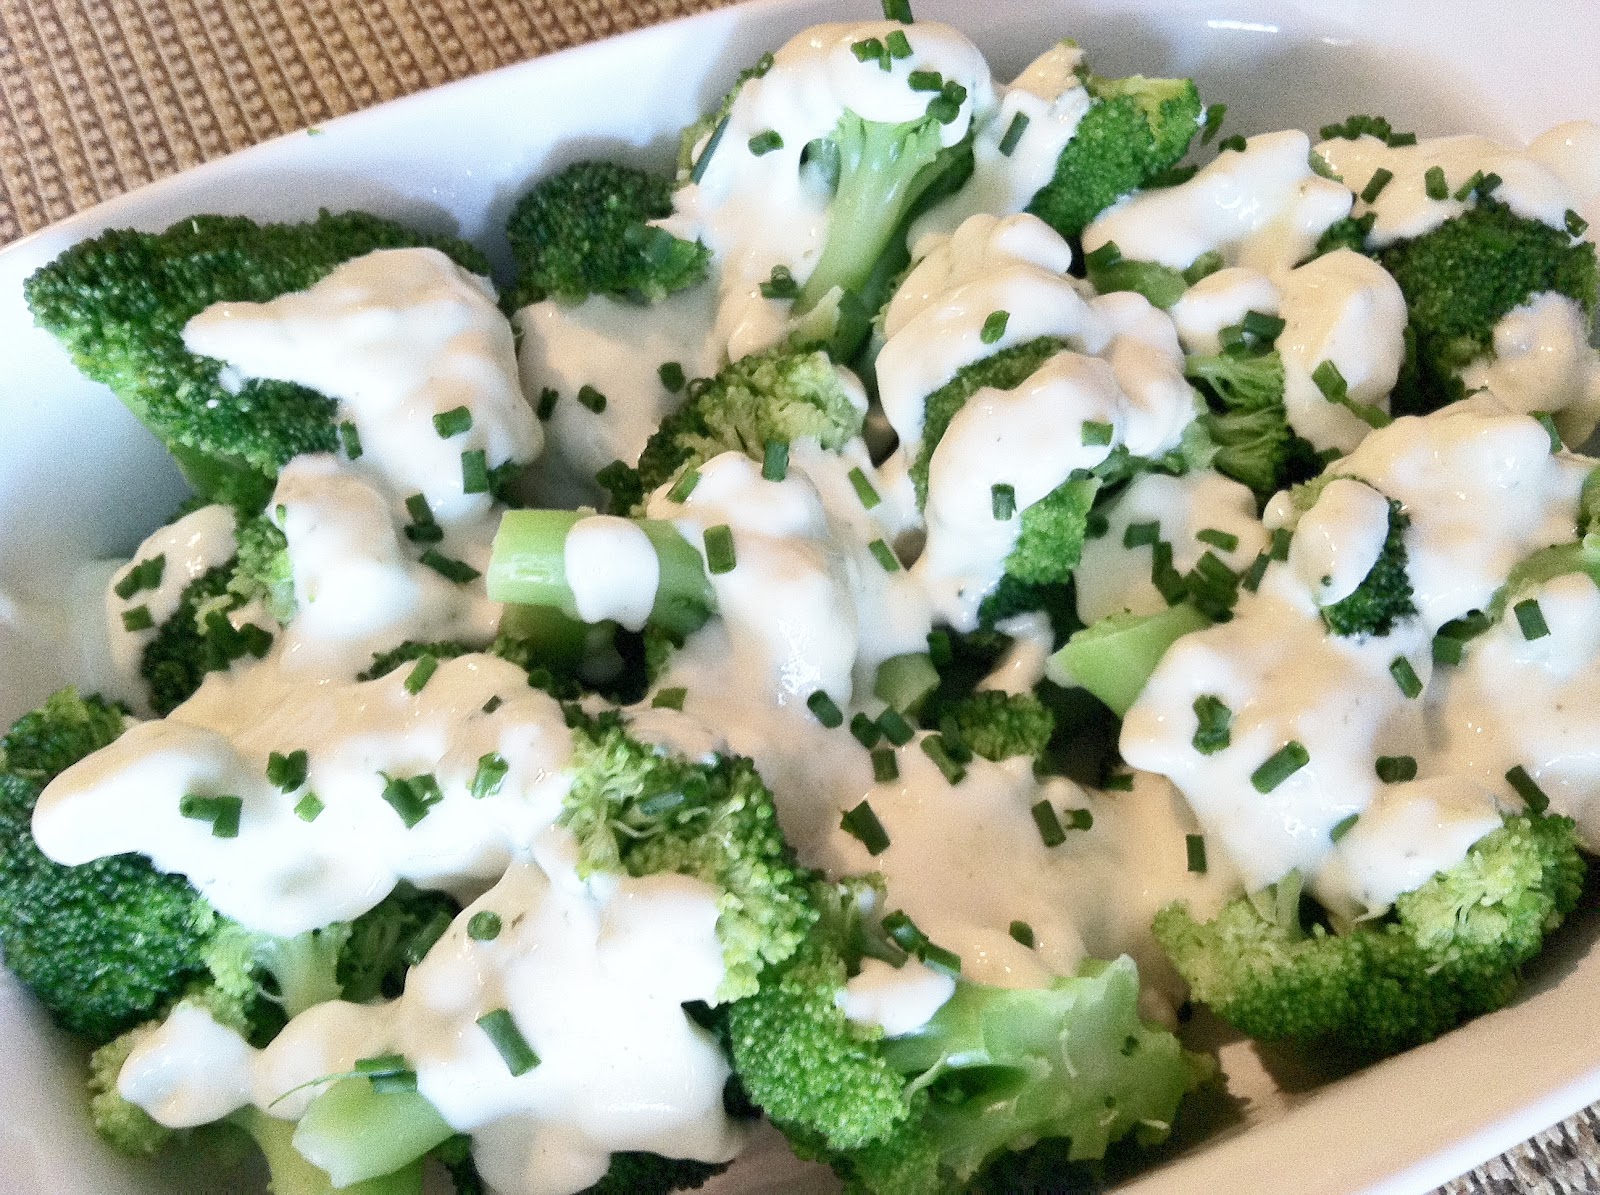 Low Carb Layla: Broccoli in a Garlic Herb Cream Sauce